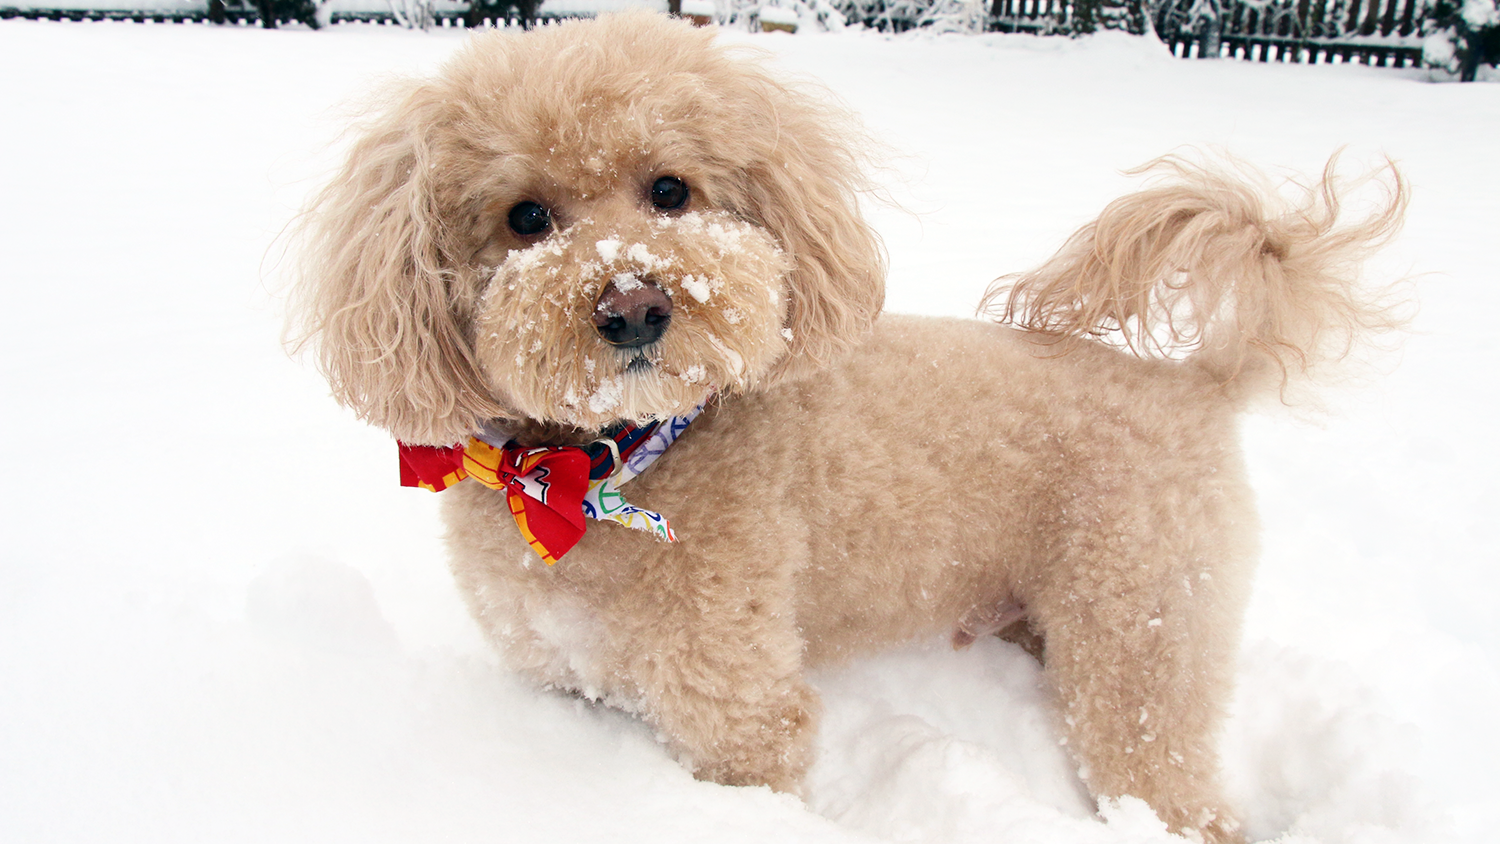 A small, fluffy dog stands in a snowy backyard.